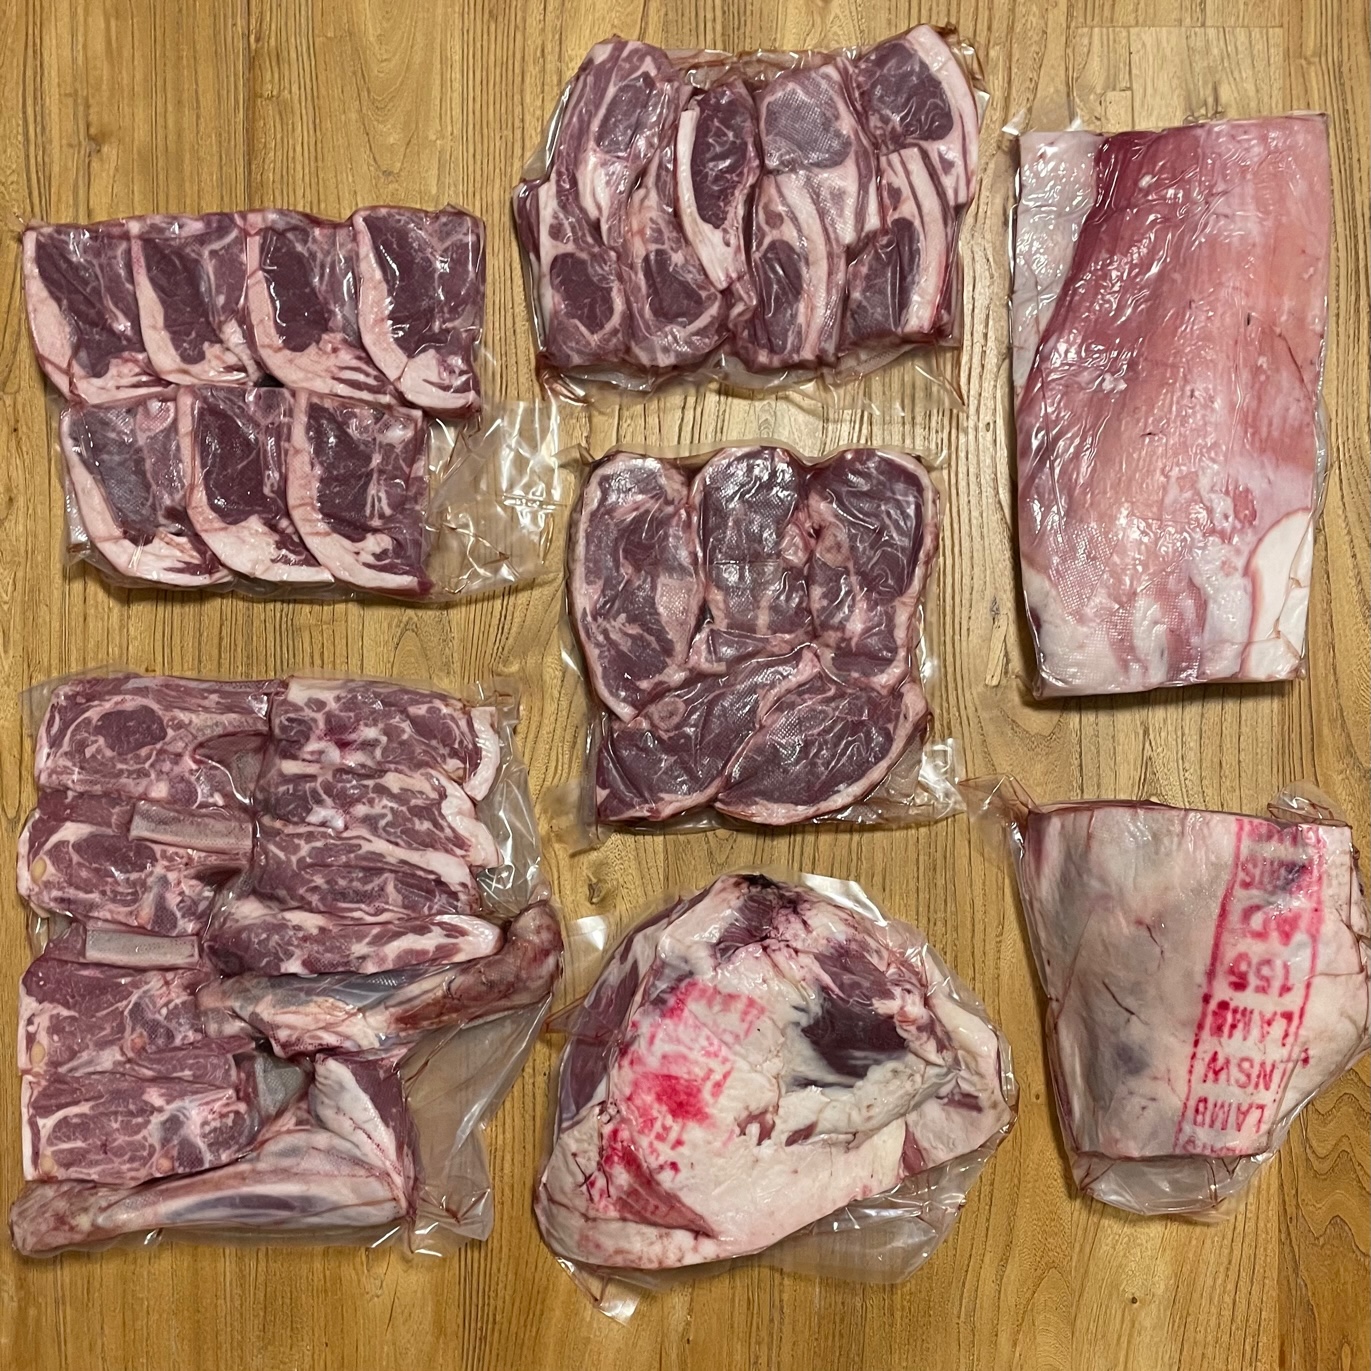 grass fed free range lamb wet aged pack home delivery sydney